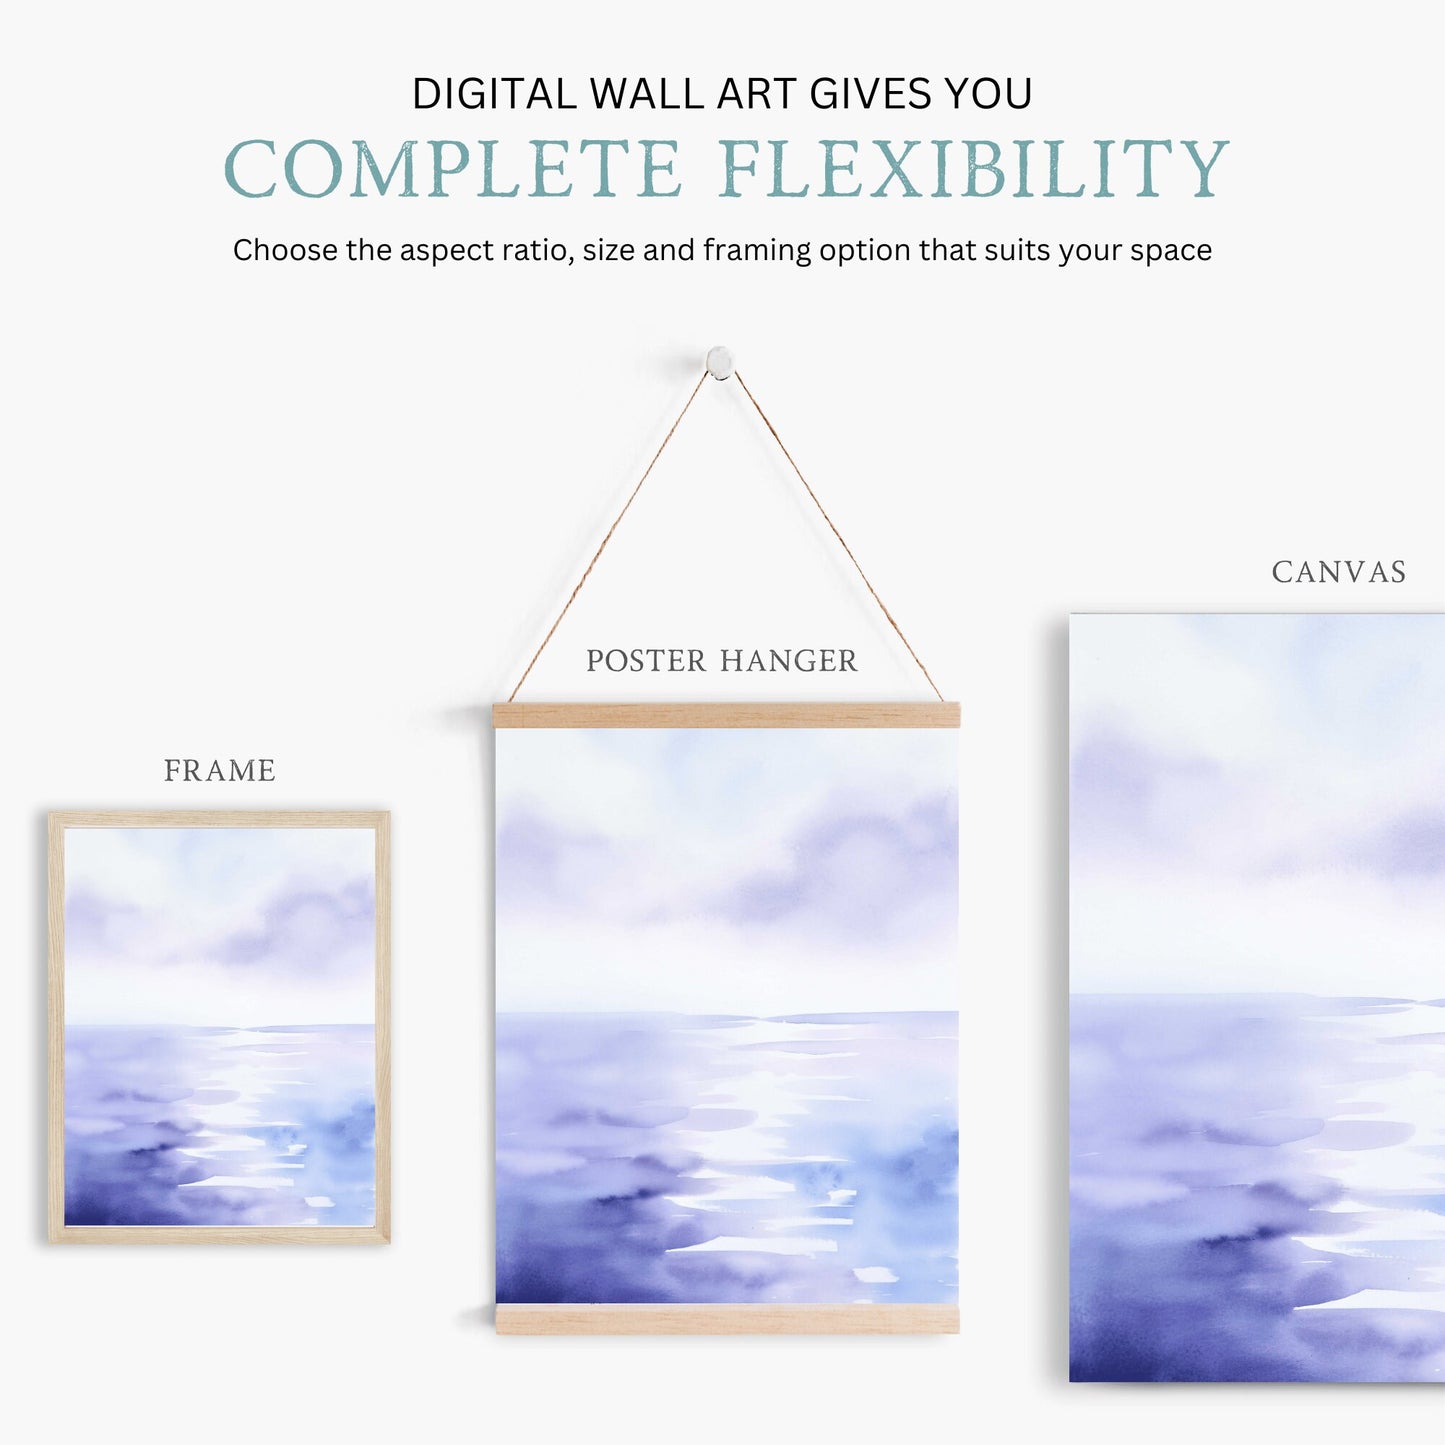 Abstract Watercolor Landscape Painting, Purple Home Decor, Sea & Sky Wall Art, Watercolor Waterscape Art, Digital Printable Wall Decor